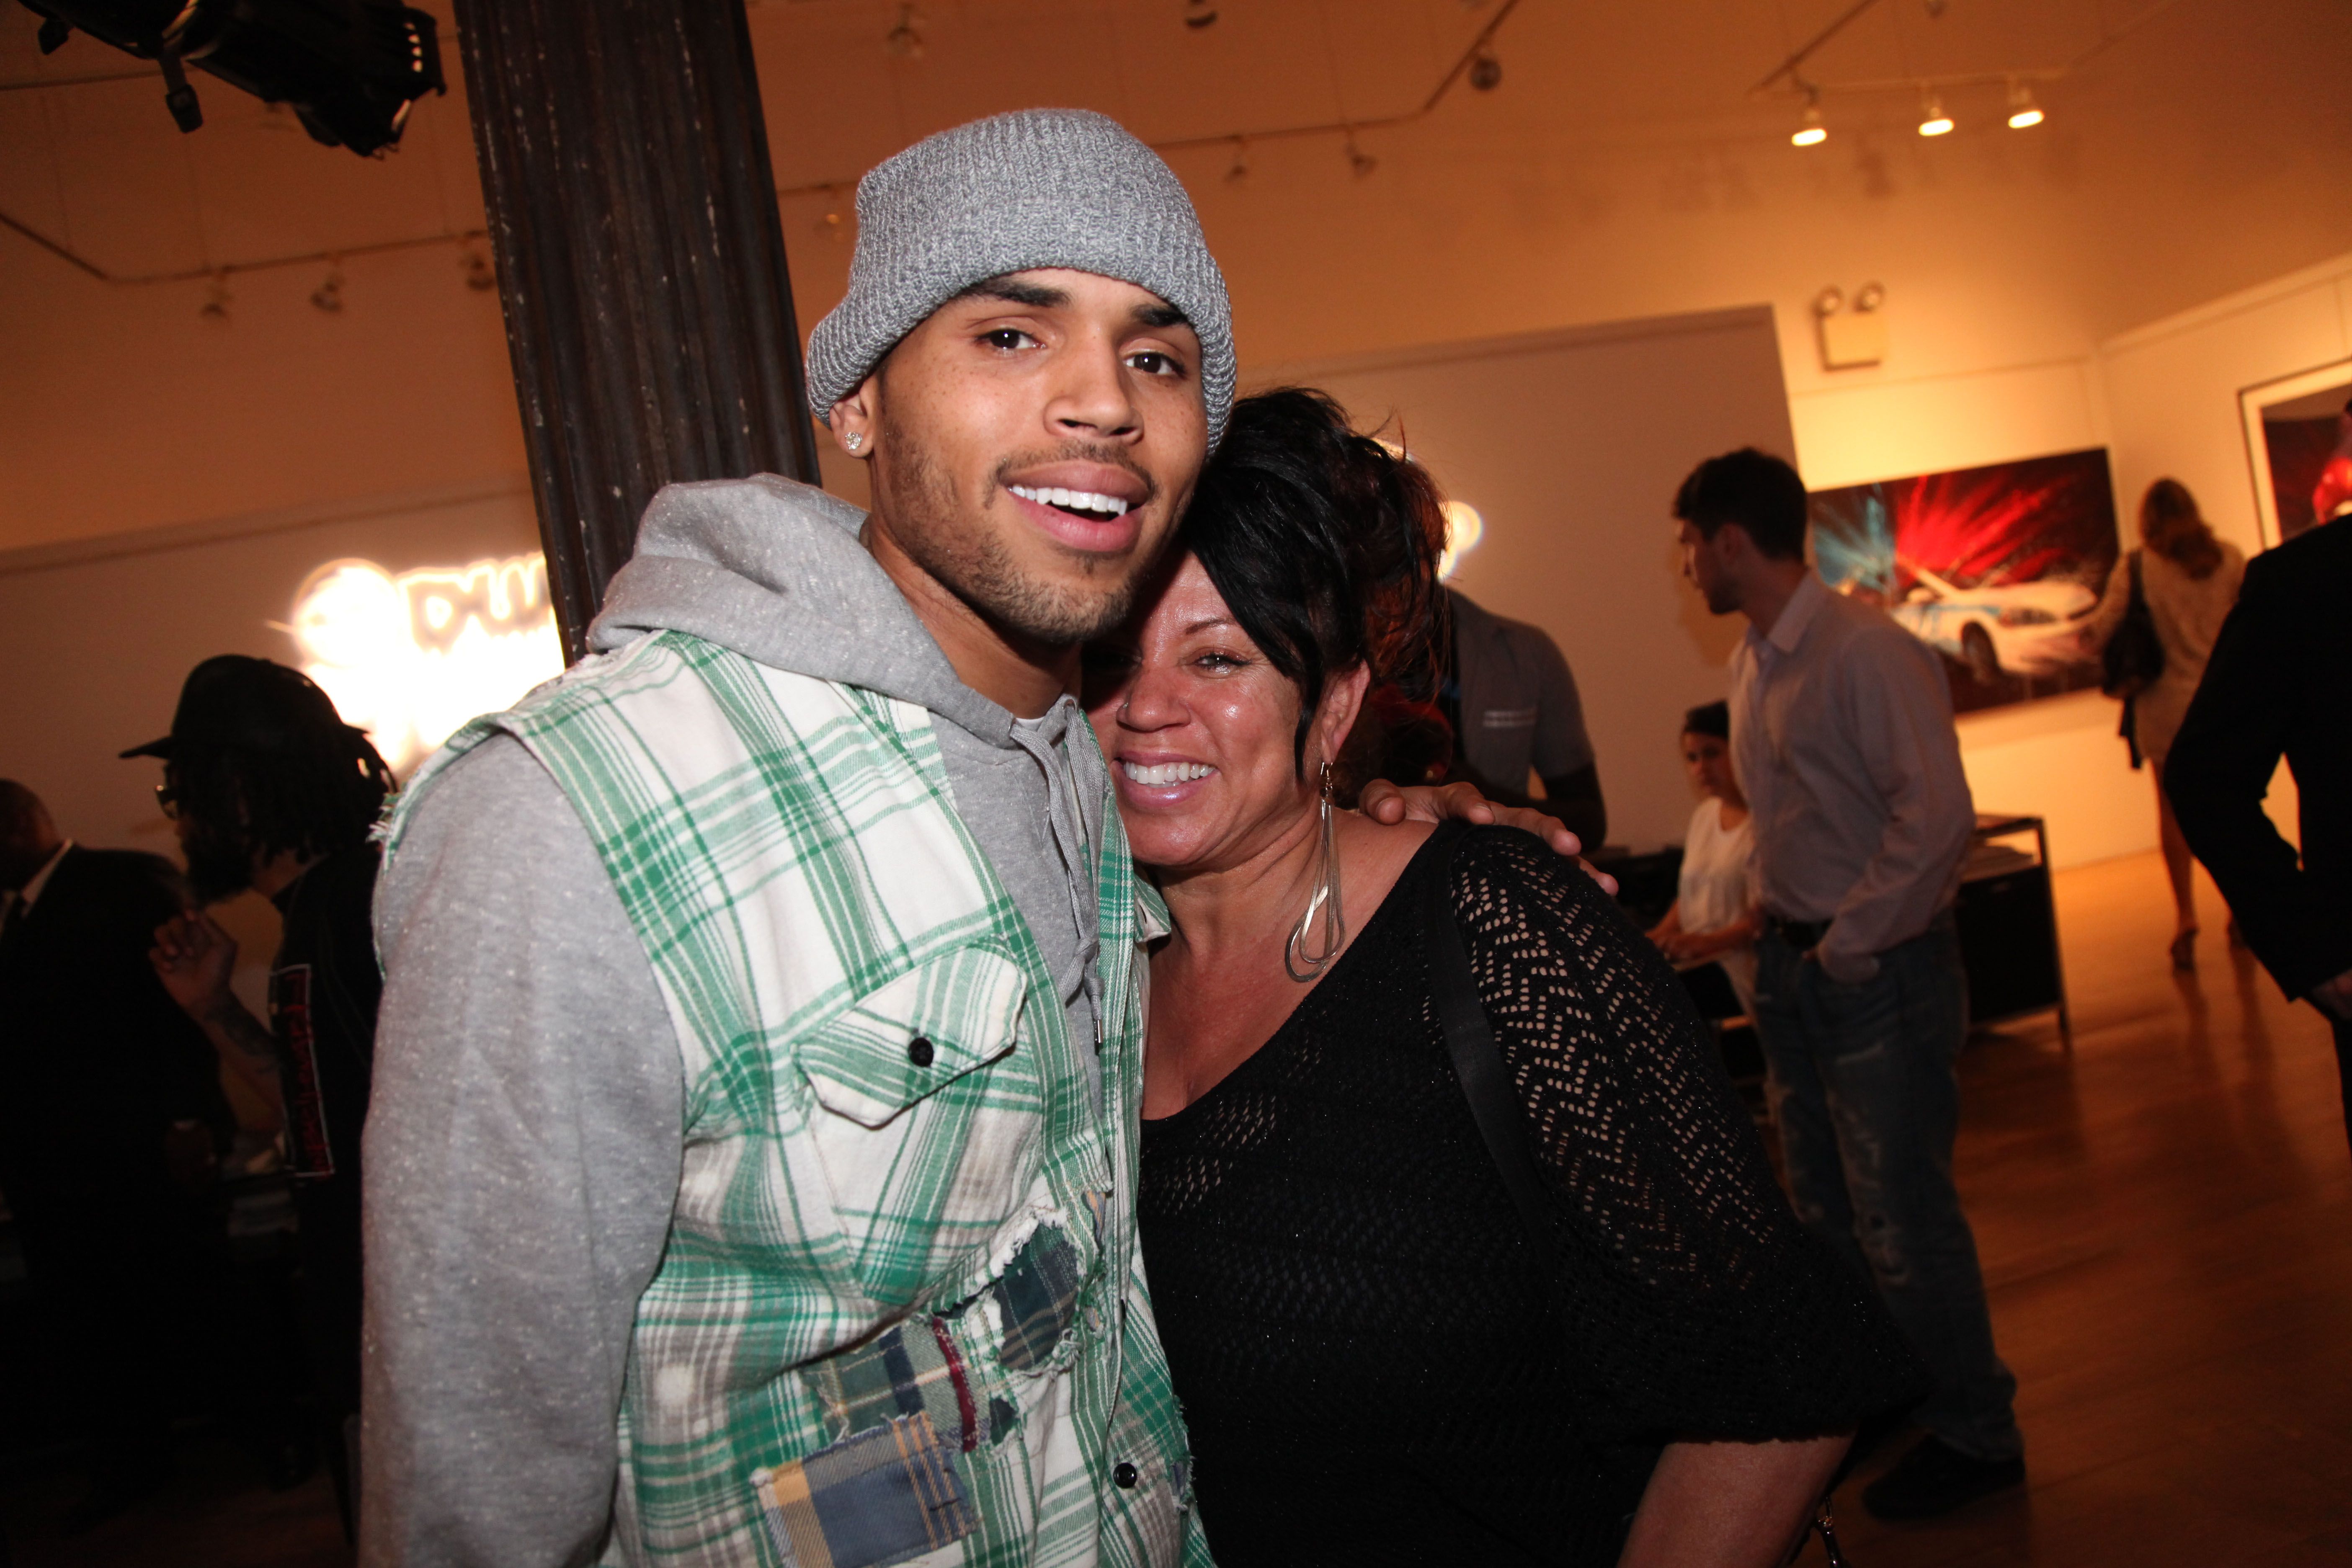 Chris Brown and Joyce Hawkins attend the Dum English Exhibition Opening at Opera Gallery on June 11, 2012 in New York City. | Photo: Getty Images